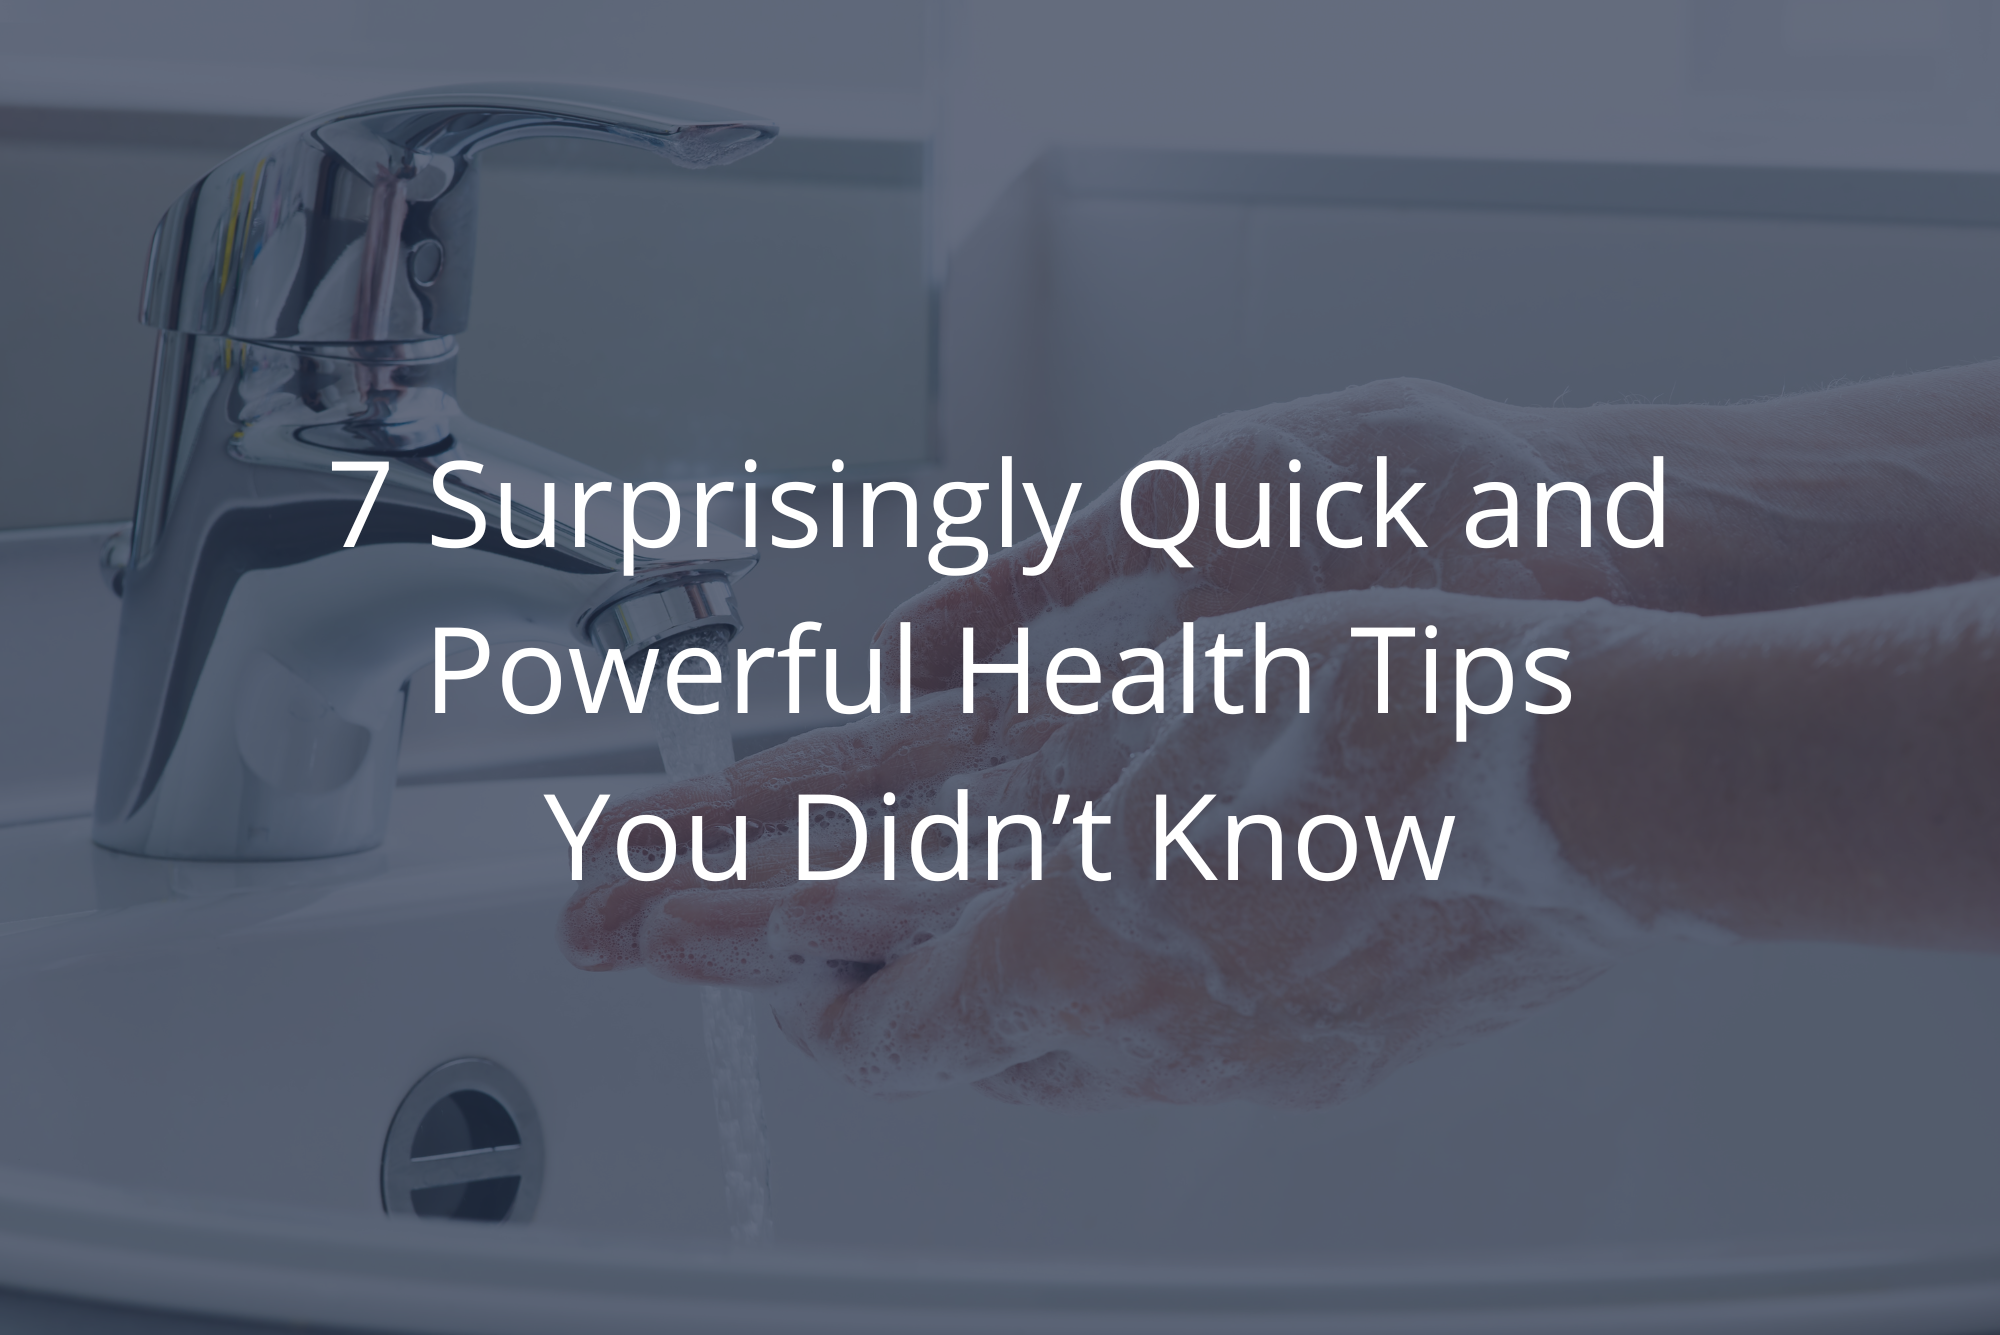 A person washes their hands properly after reading Dr. Rosenberg’s 7 quick health tips with a dark overlay.